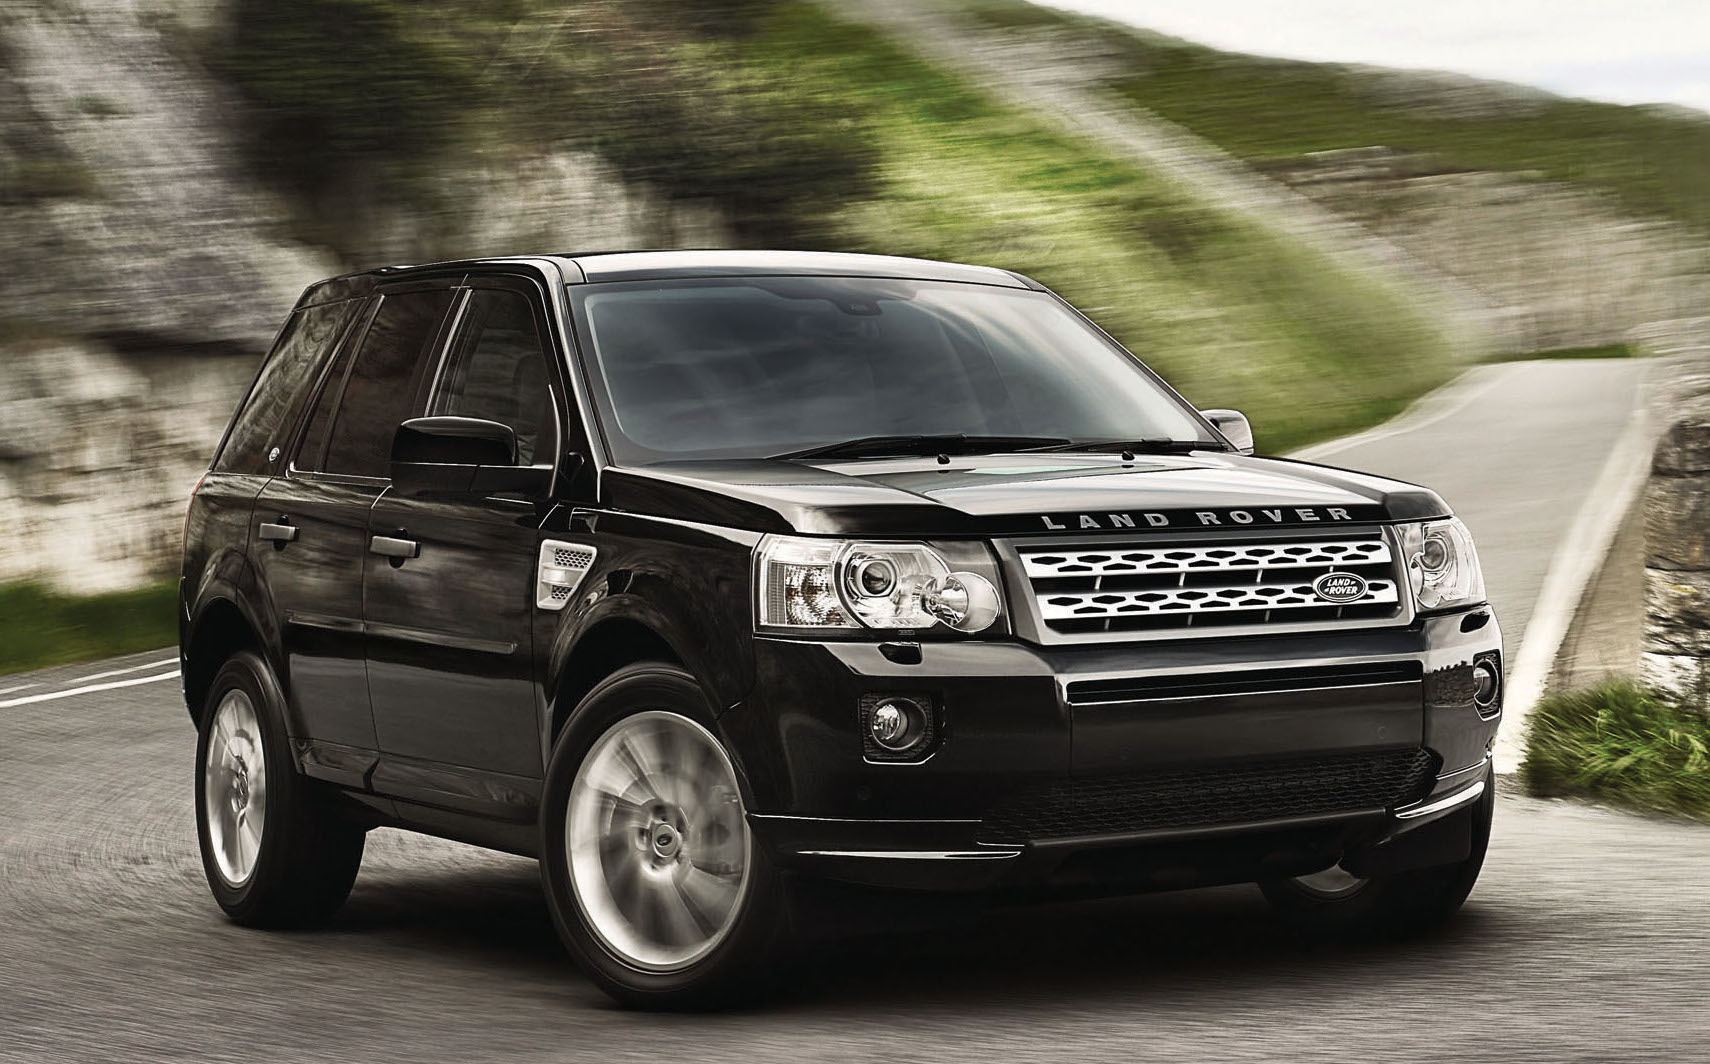 ad-nationwide-land-rover-year-end-sales-promotion-with-cash-rebates-of